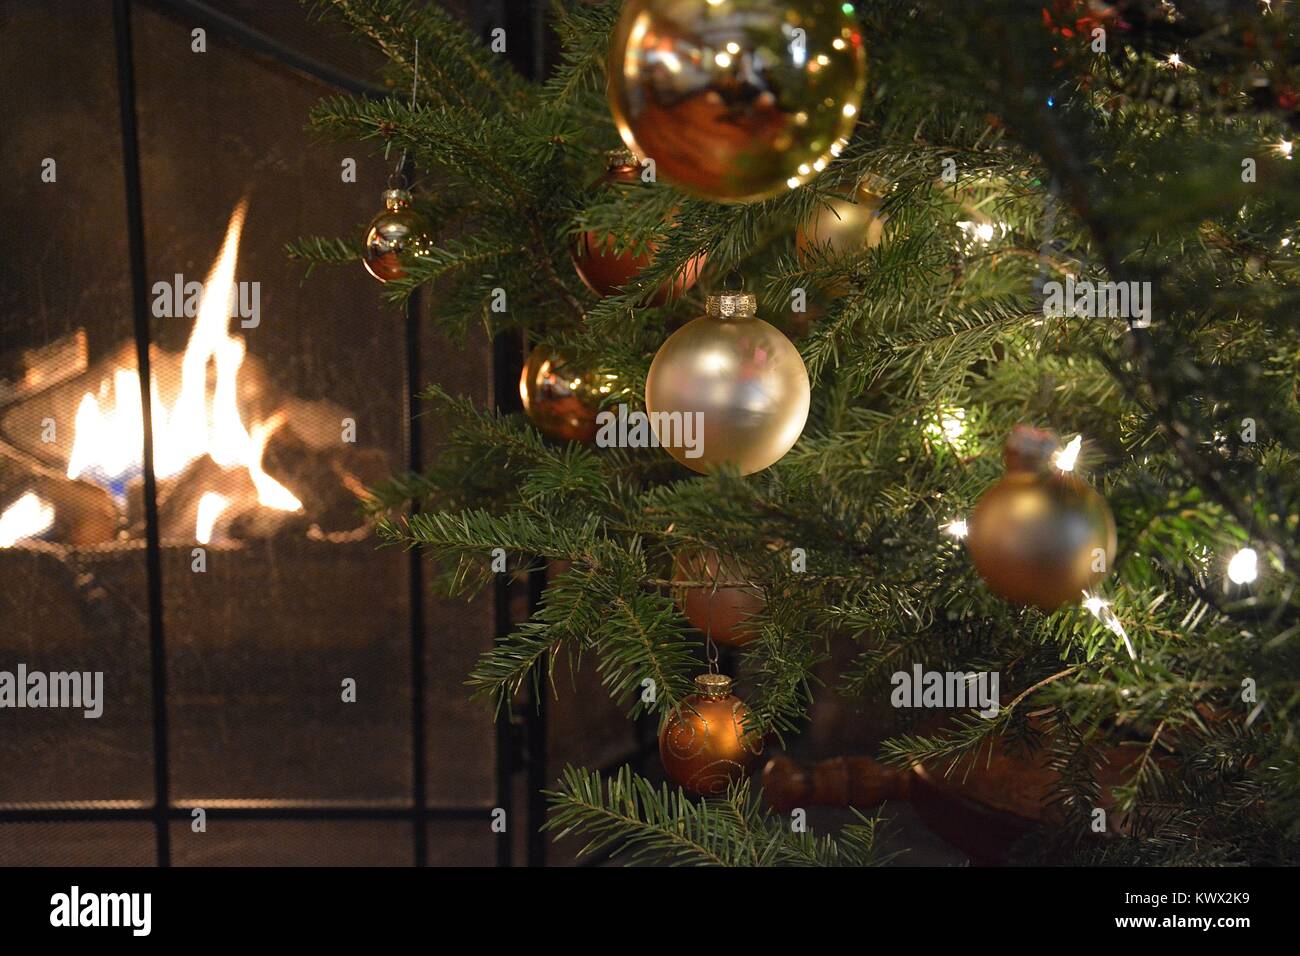 A Christmas with Christmas Decorations, such as stockings label M & G next to a warm fire during the holiday season, in New York, USA Stock Photo